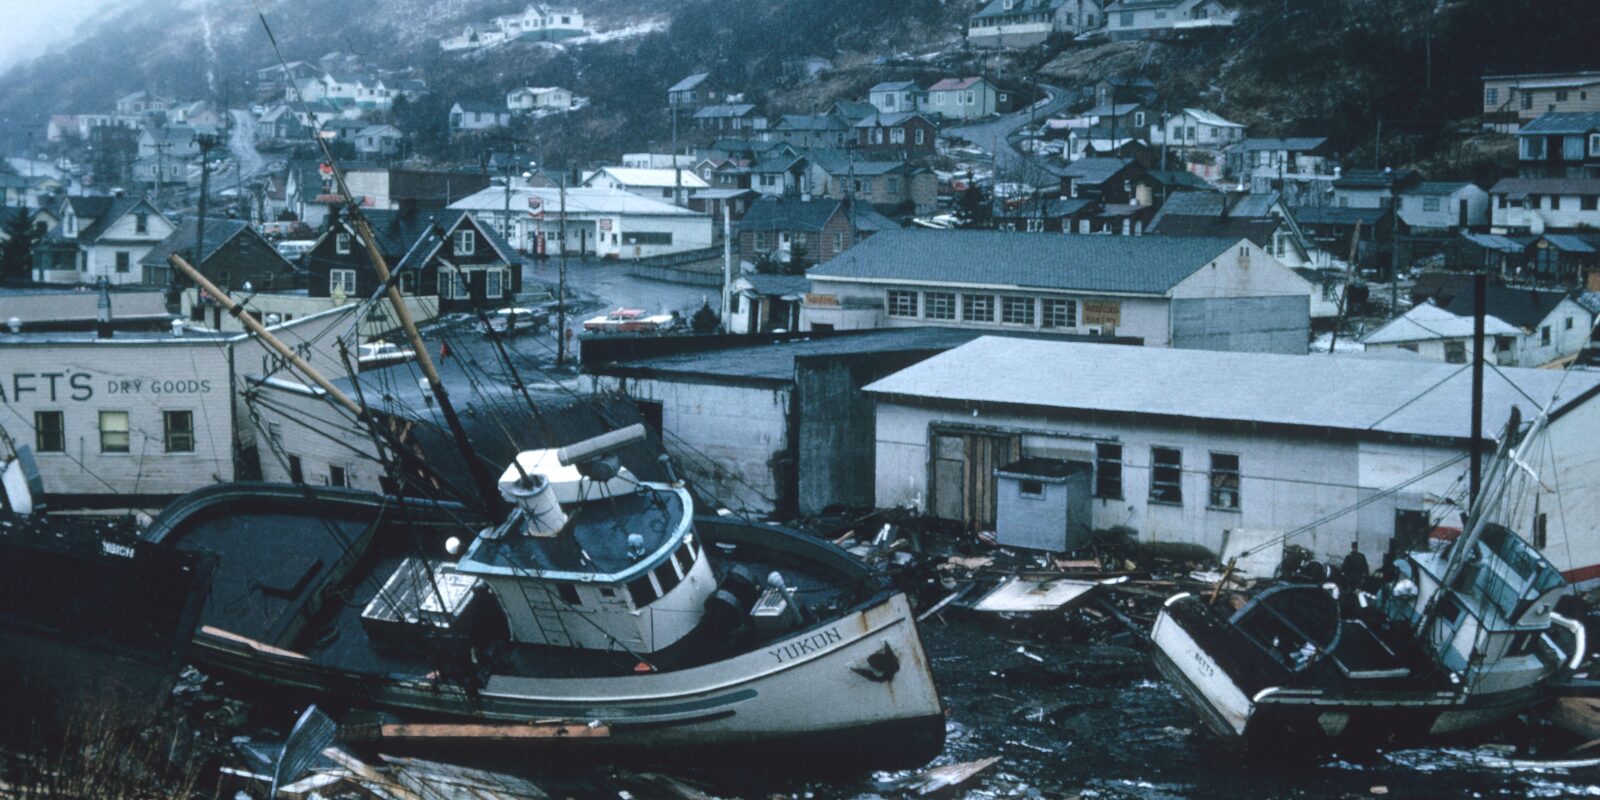 A fishing boat sits among litter strewn streets and damaged buildings..